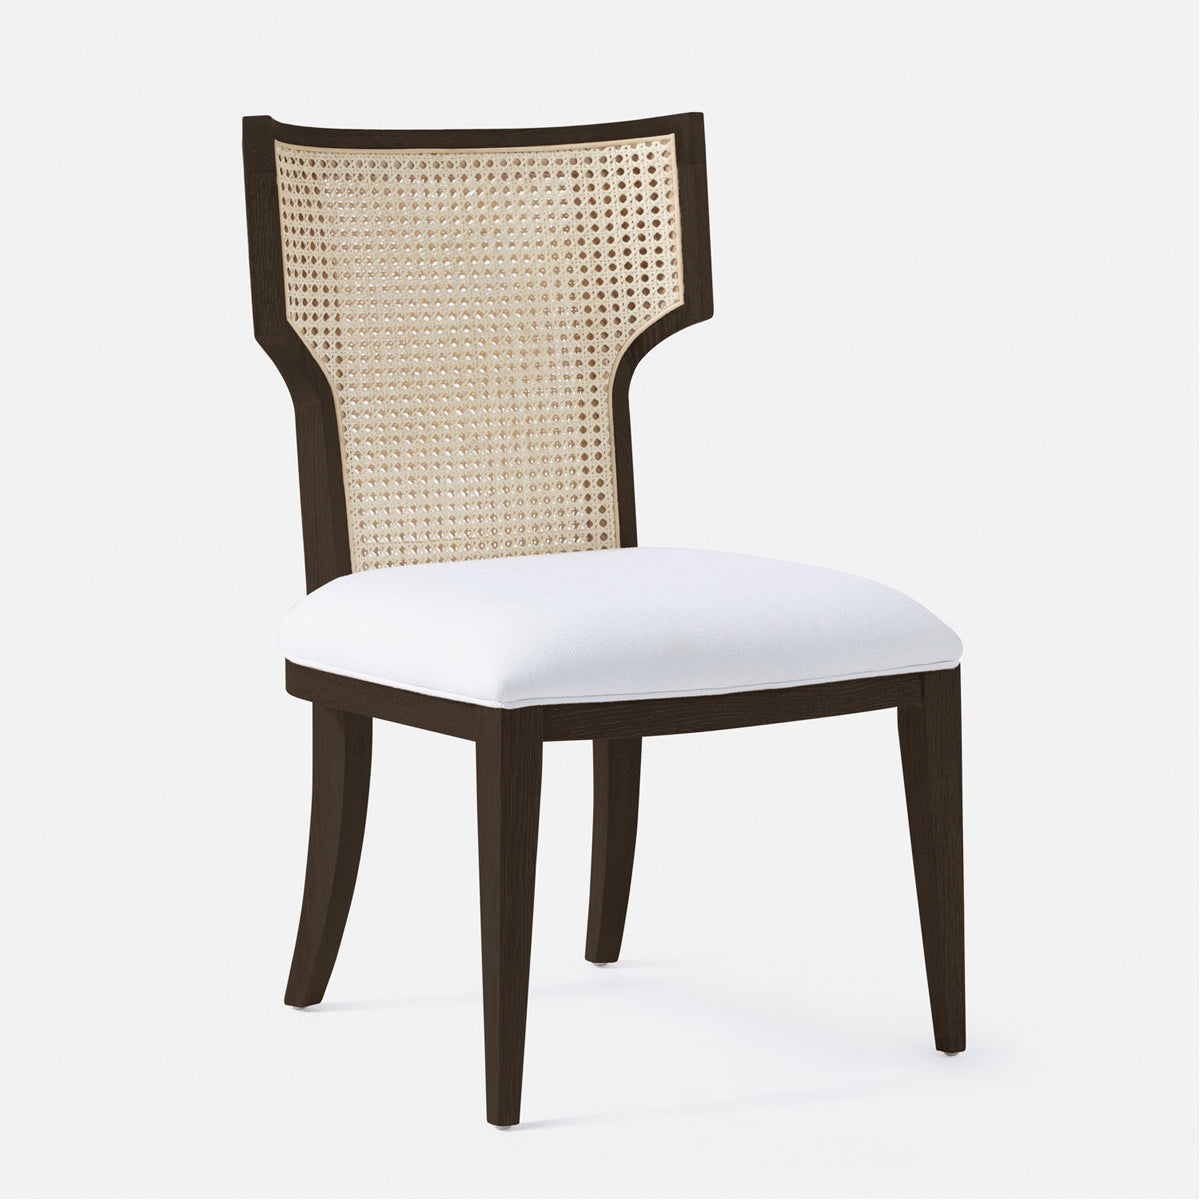 Made Goods Carleen Wingback Cane Dining Chair in Severn Canvas